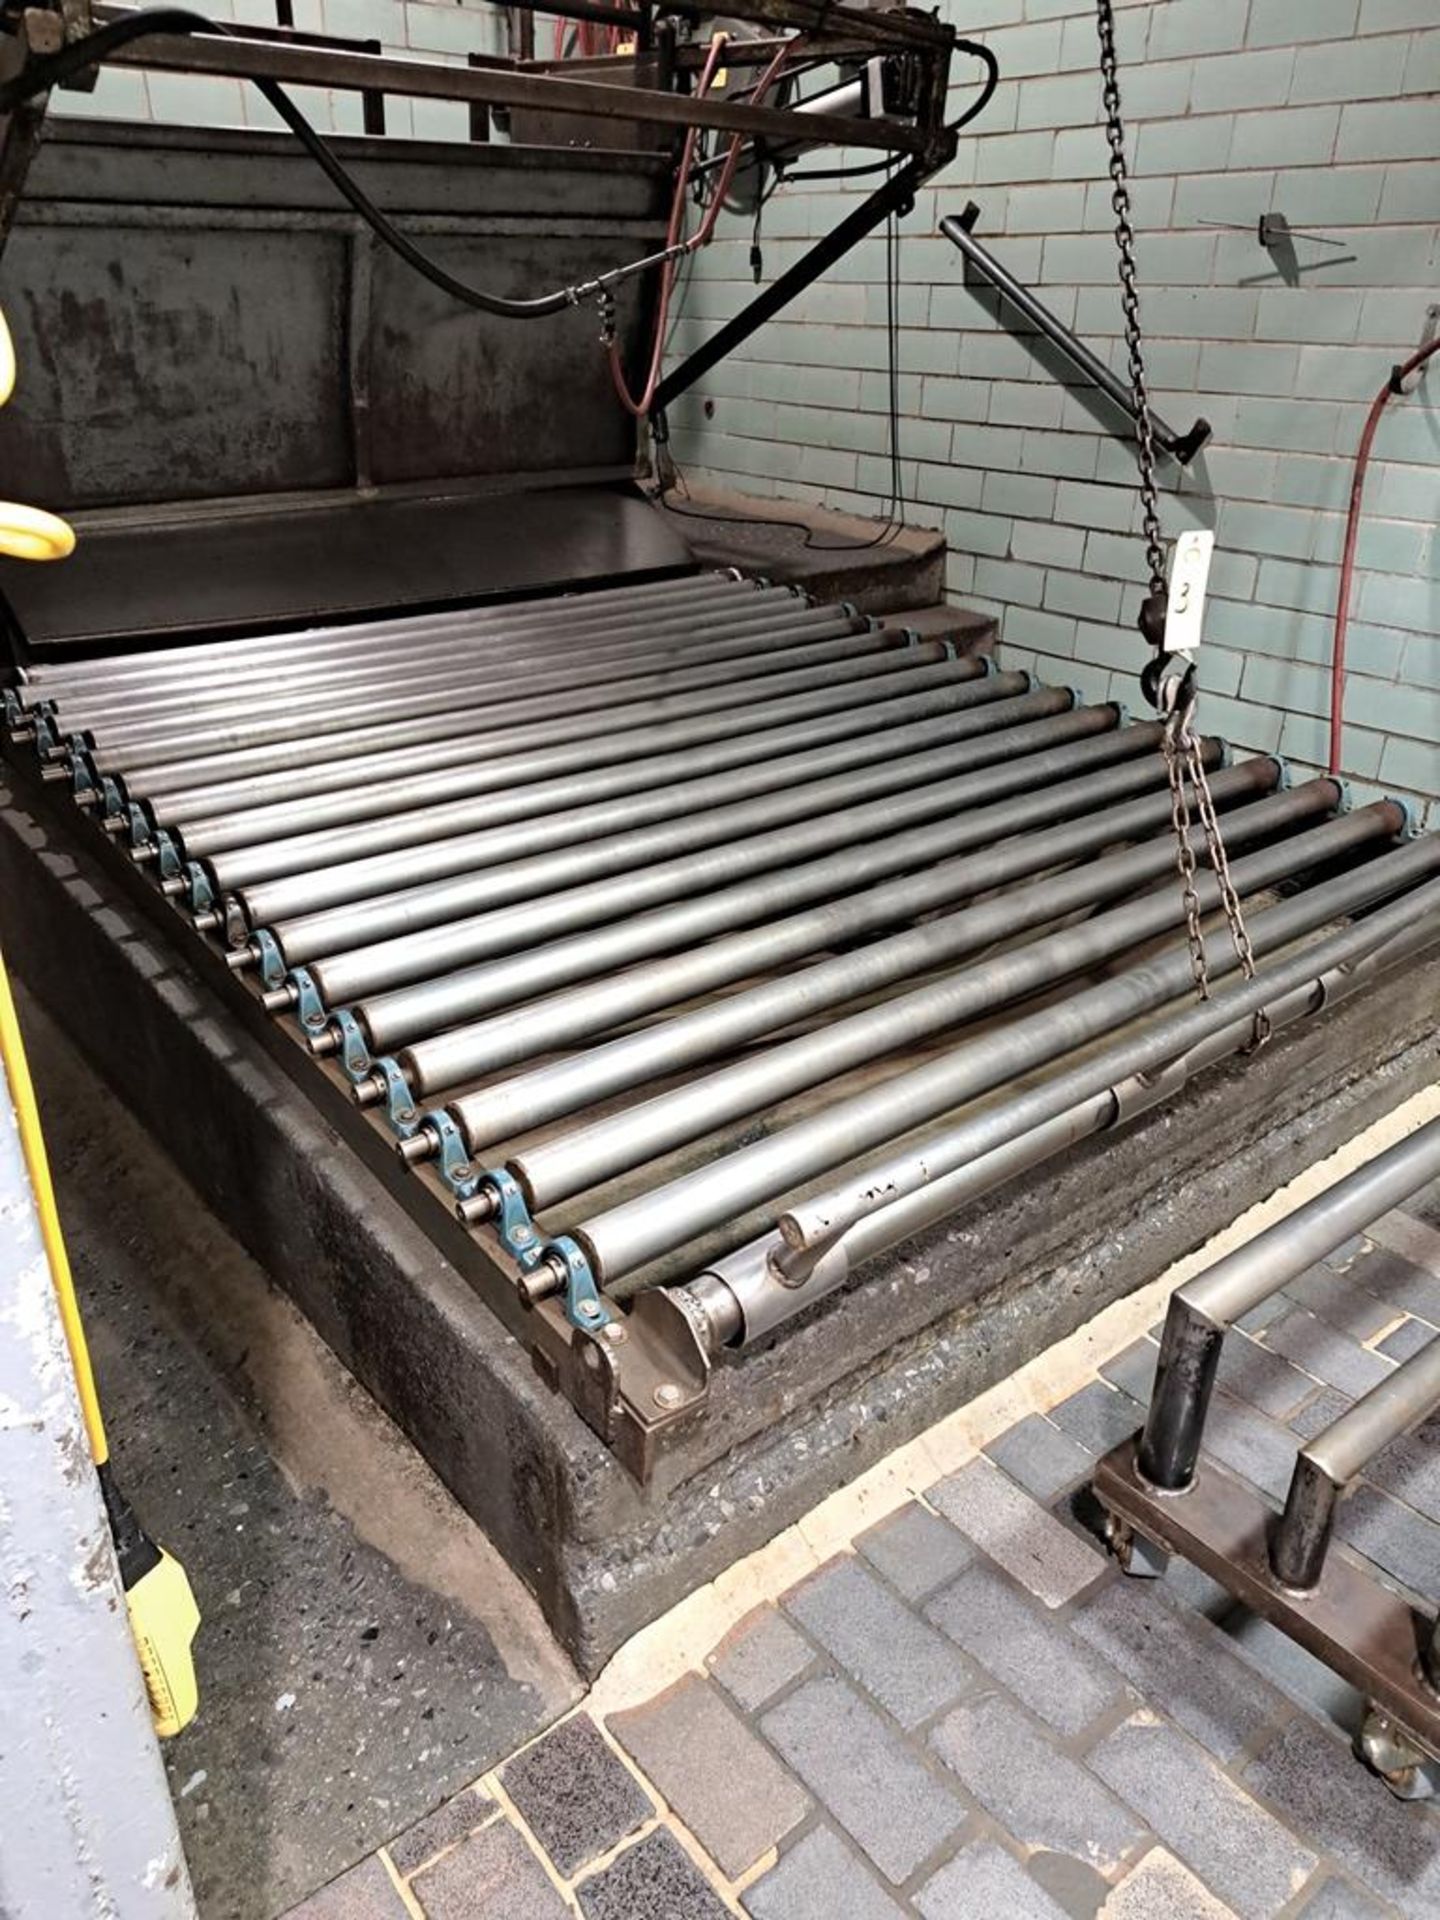 Stainless Steel Landing Table with rollers, 7' W X 8' L (Required Loading Fee $250.00 Rigger: Norm - Image 2 of 2